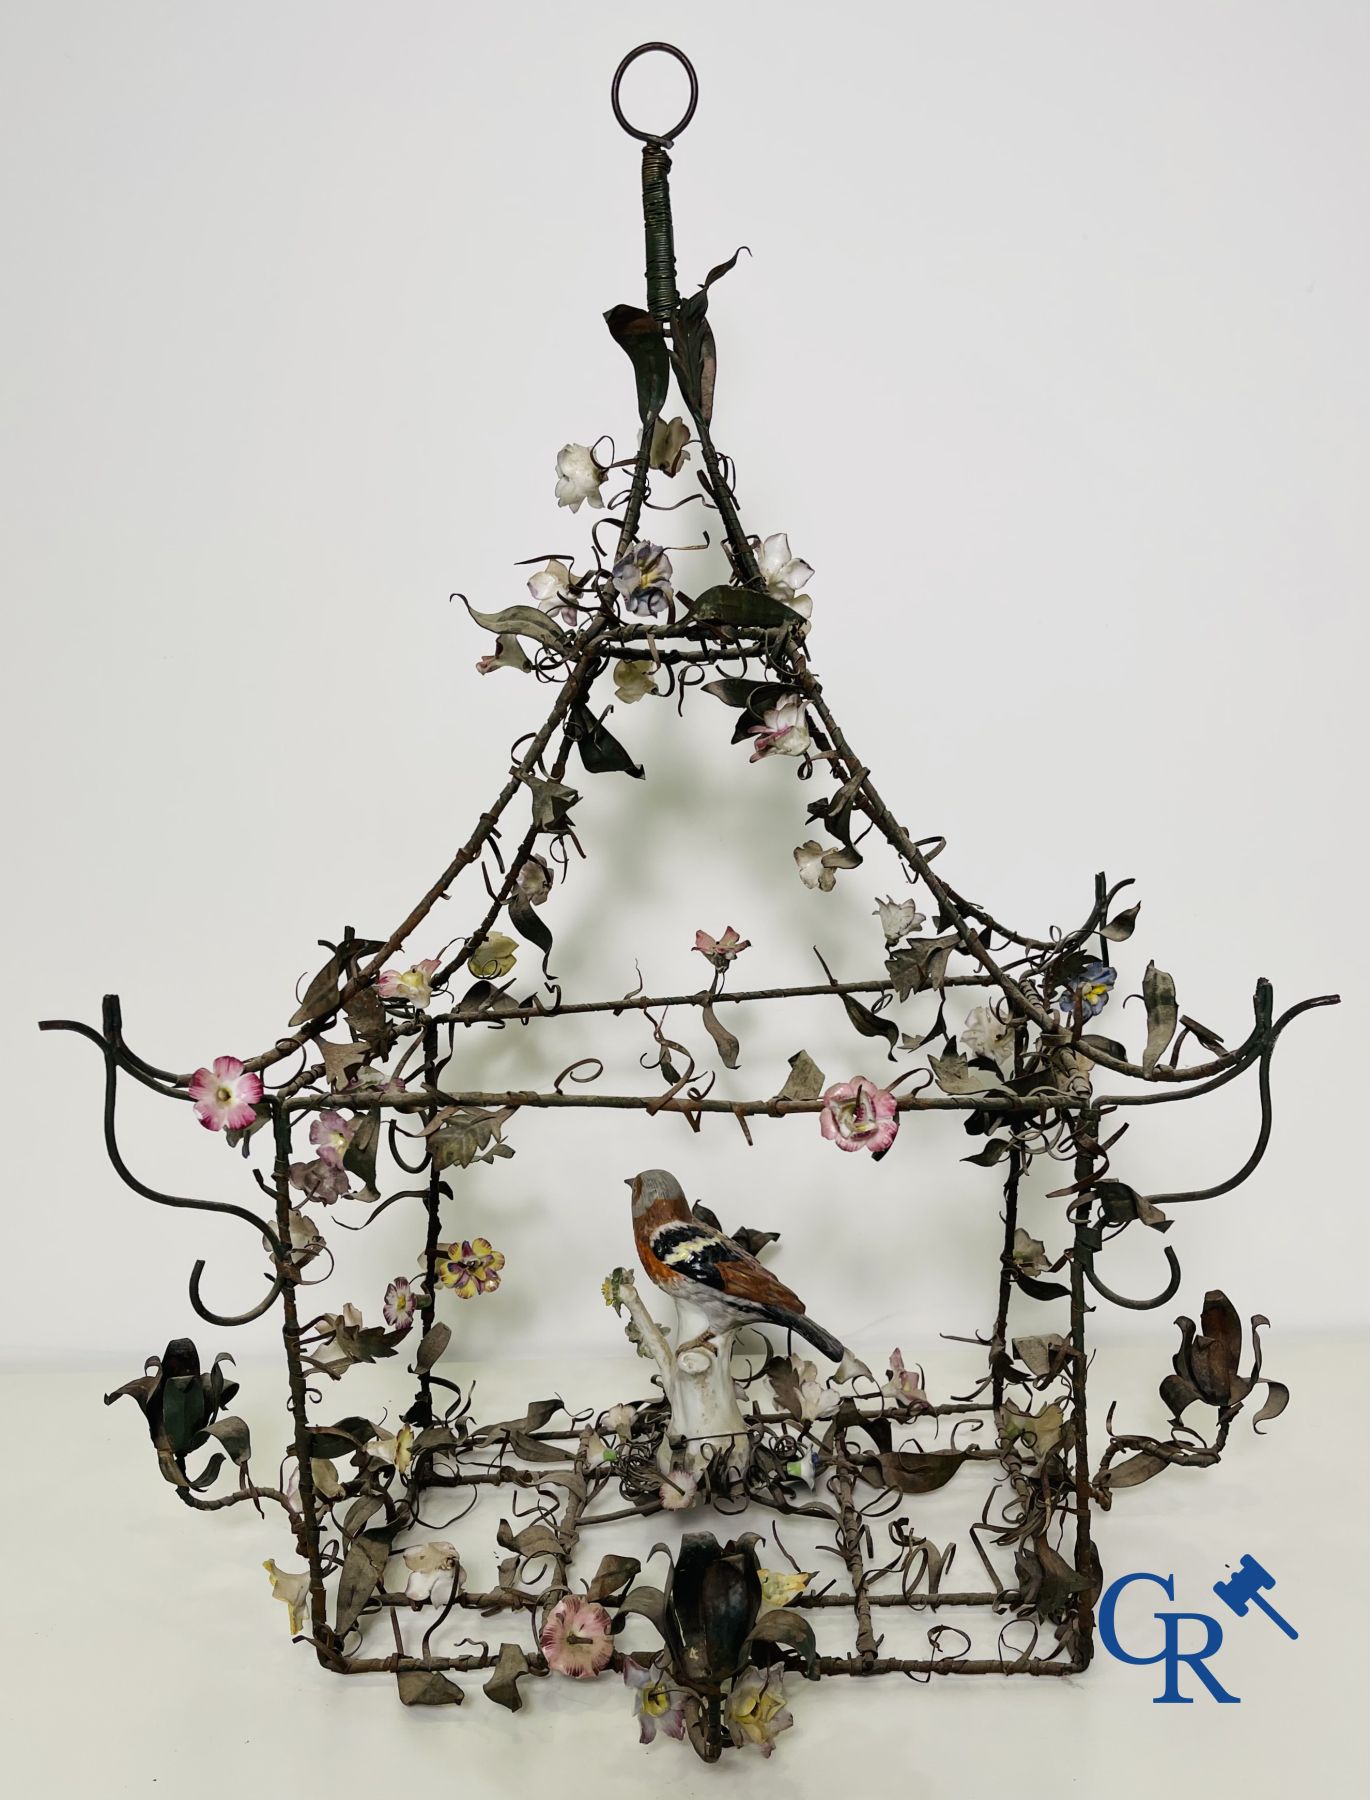 Chandelier with porcelain flowers and a bird in the manner of Meissen or Sèvres. 19th century. - Image 8 of 11